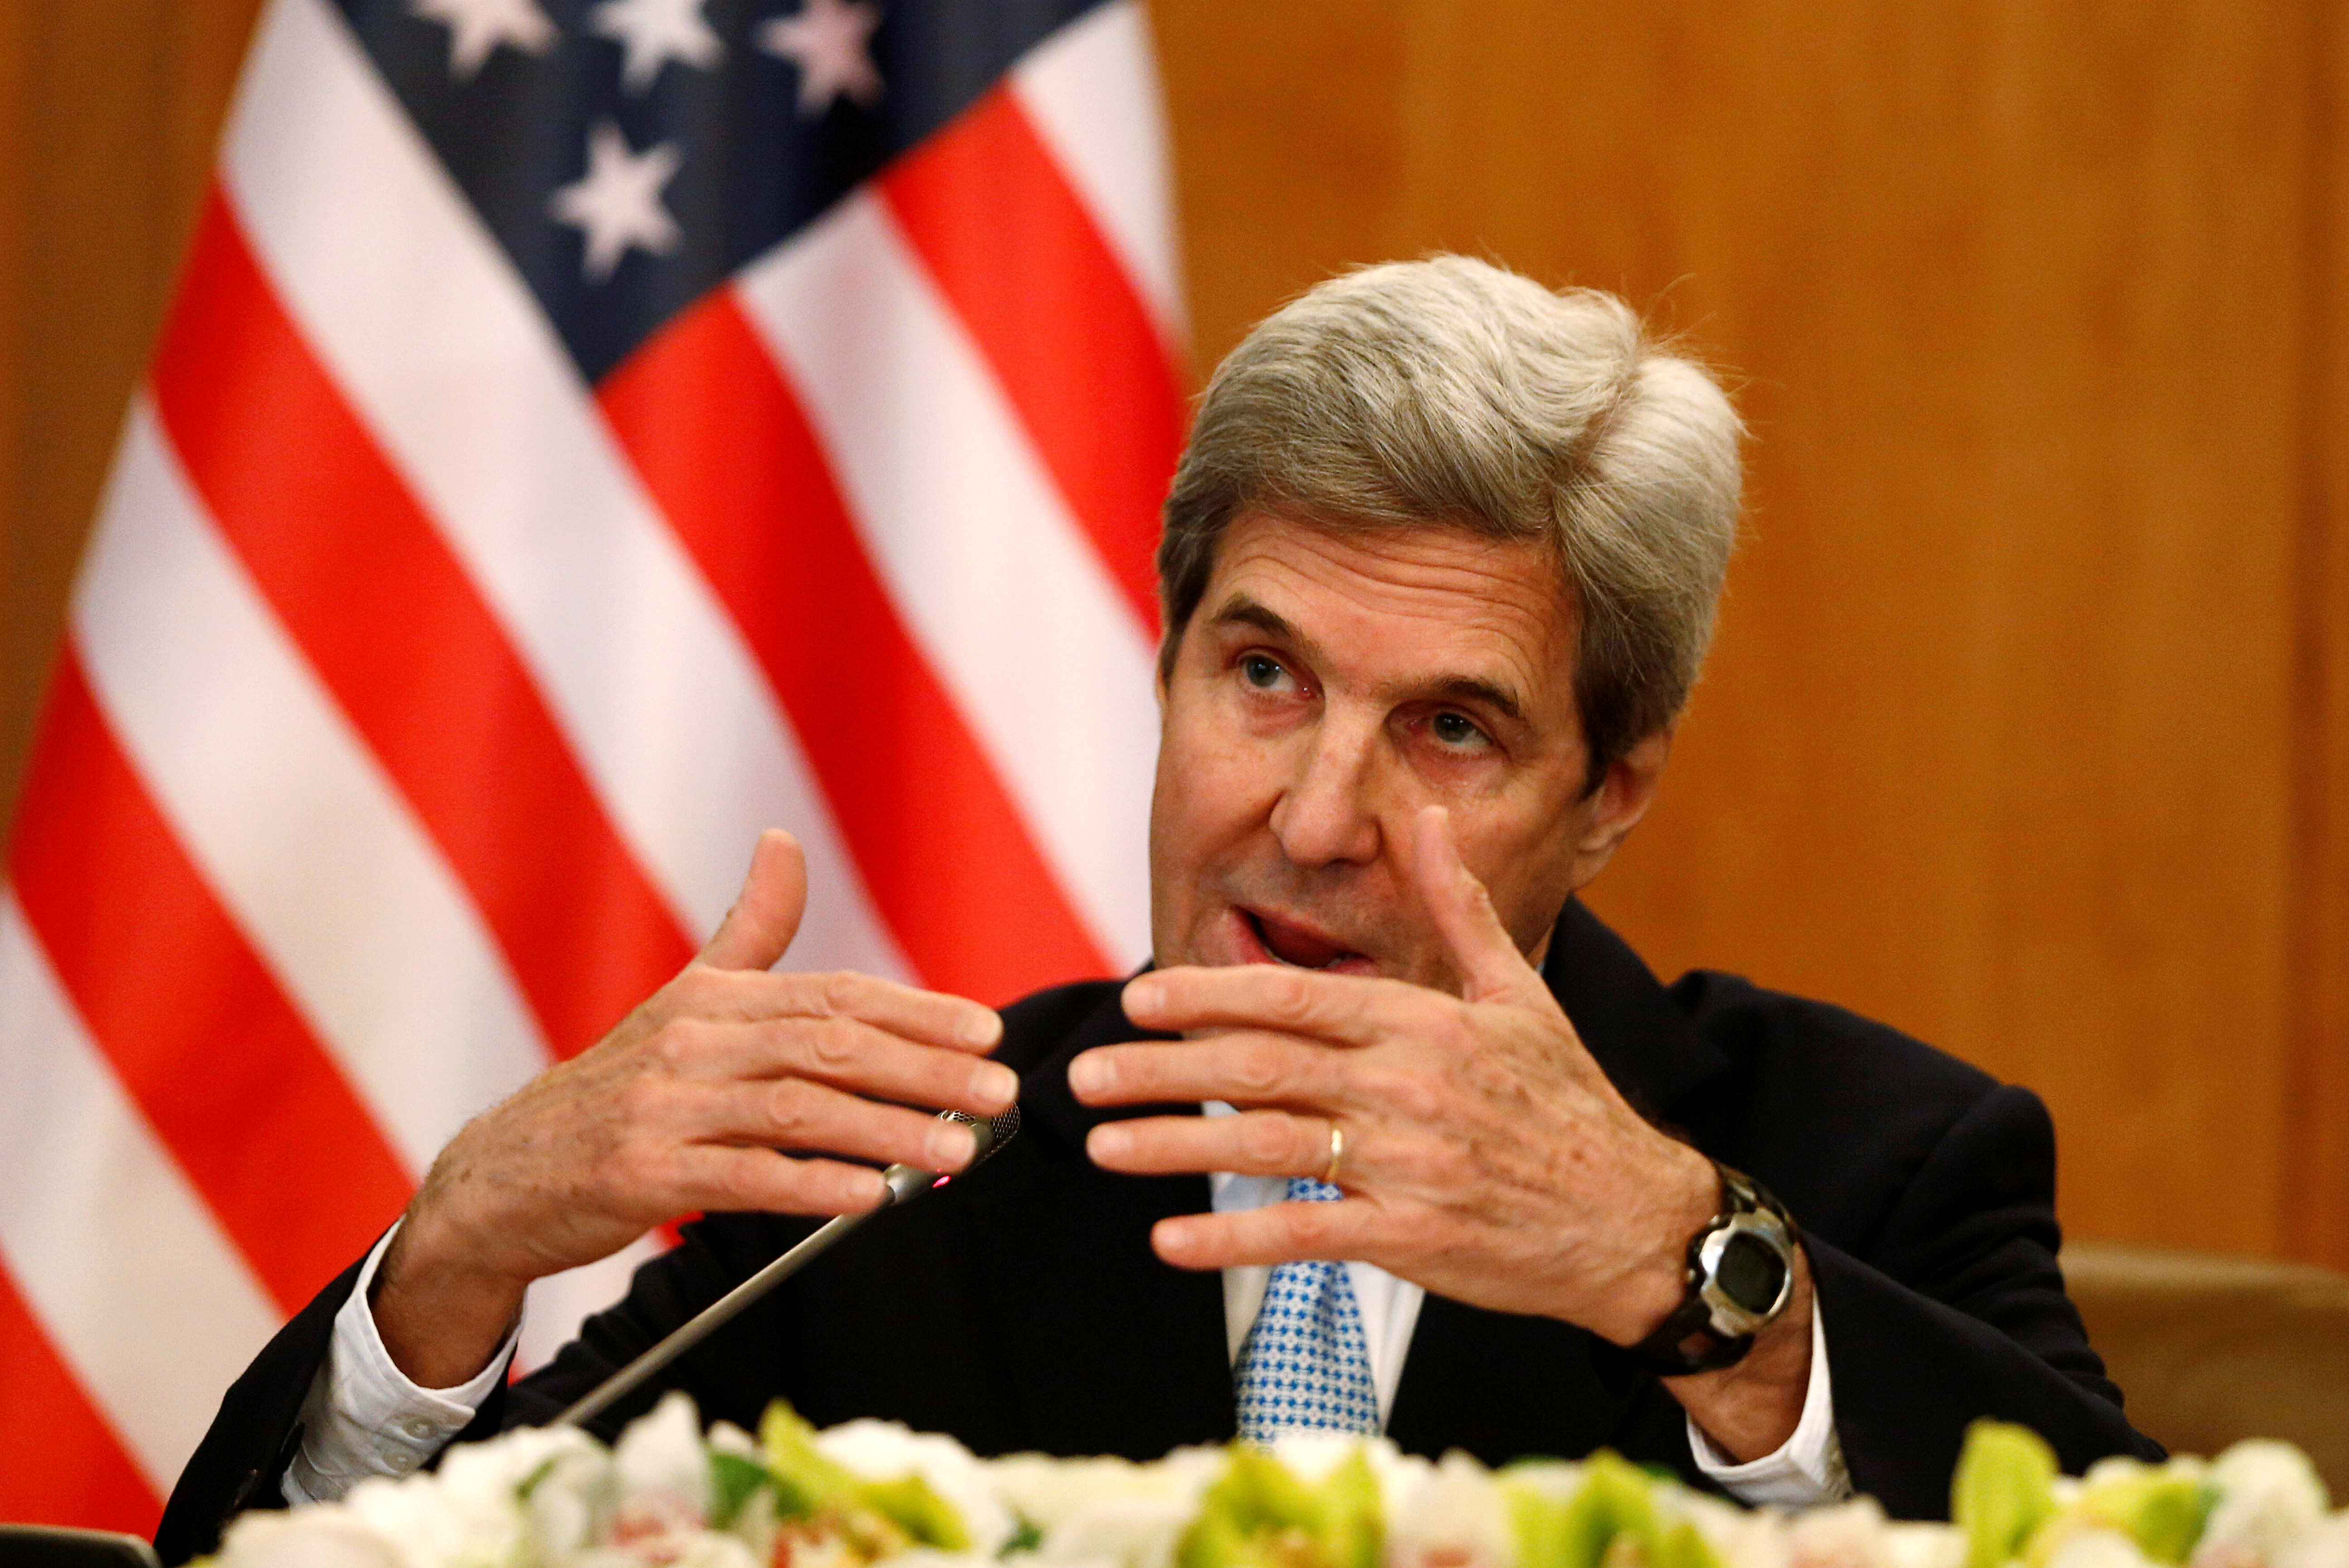 U.S. Secretary of State John Kerry gestures during a news conference in Riyadh